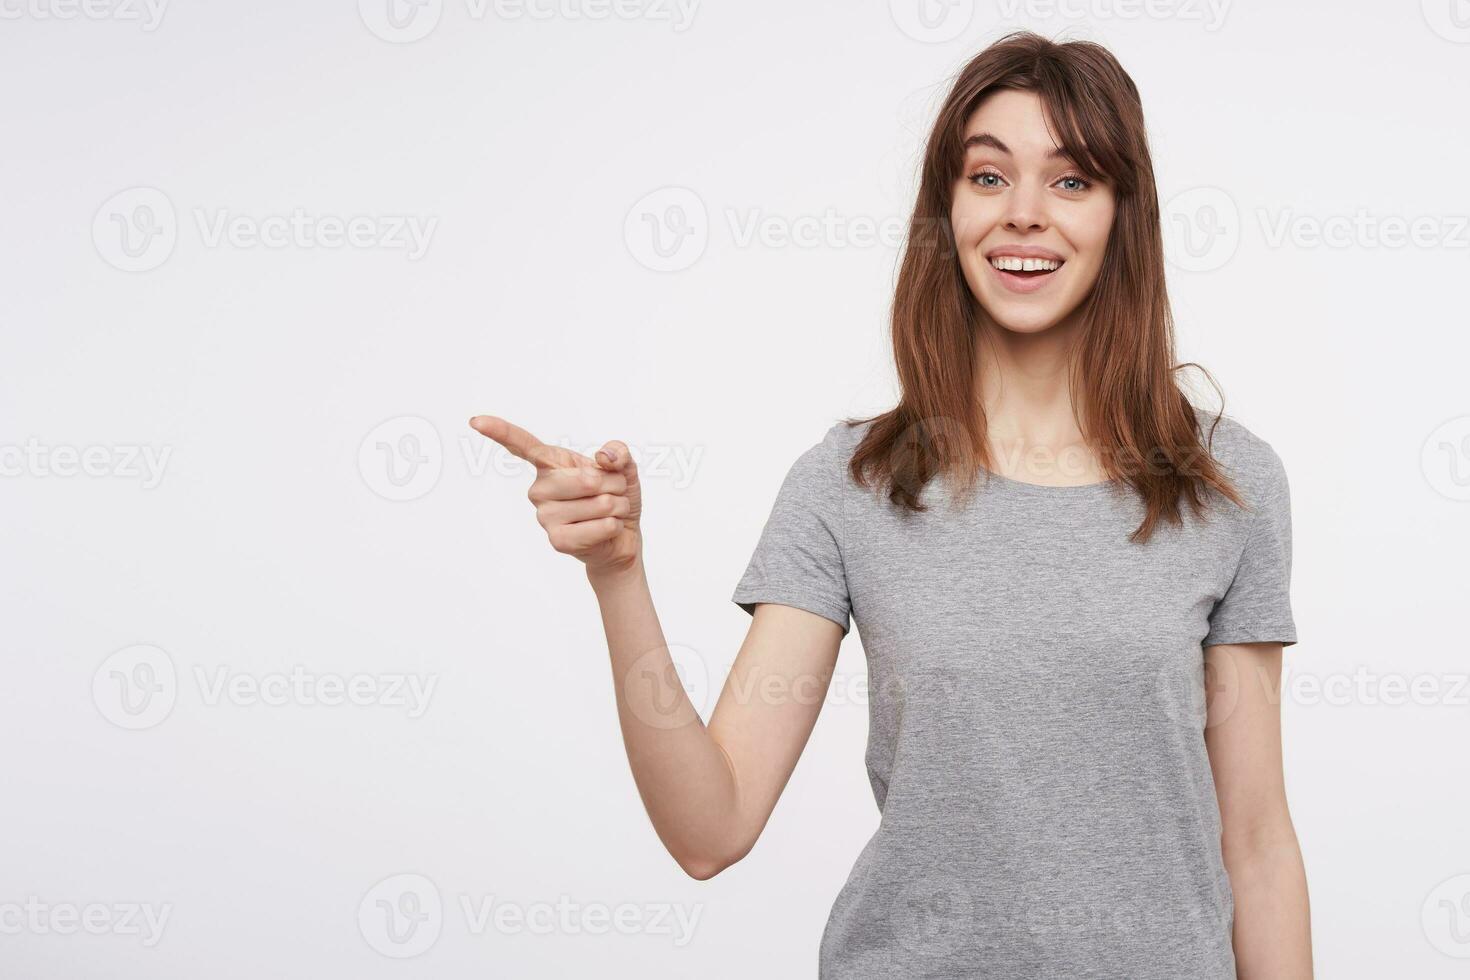 Indoor photo of young cheerful brunette woman with natural makeup smiling widely while pointing aside with forefinger, isolated against white background